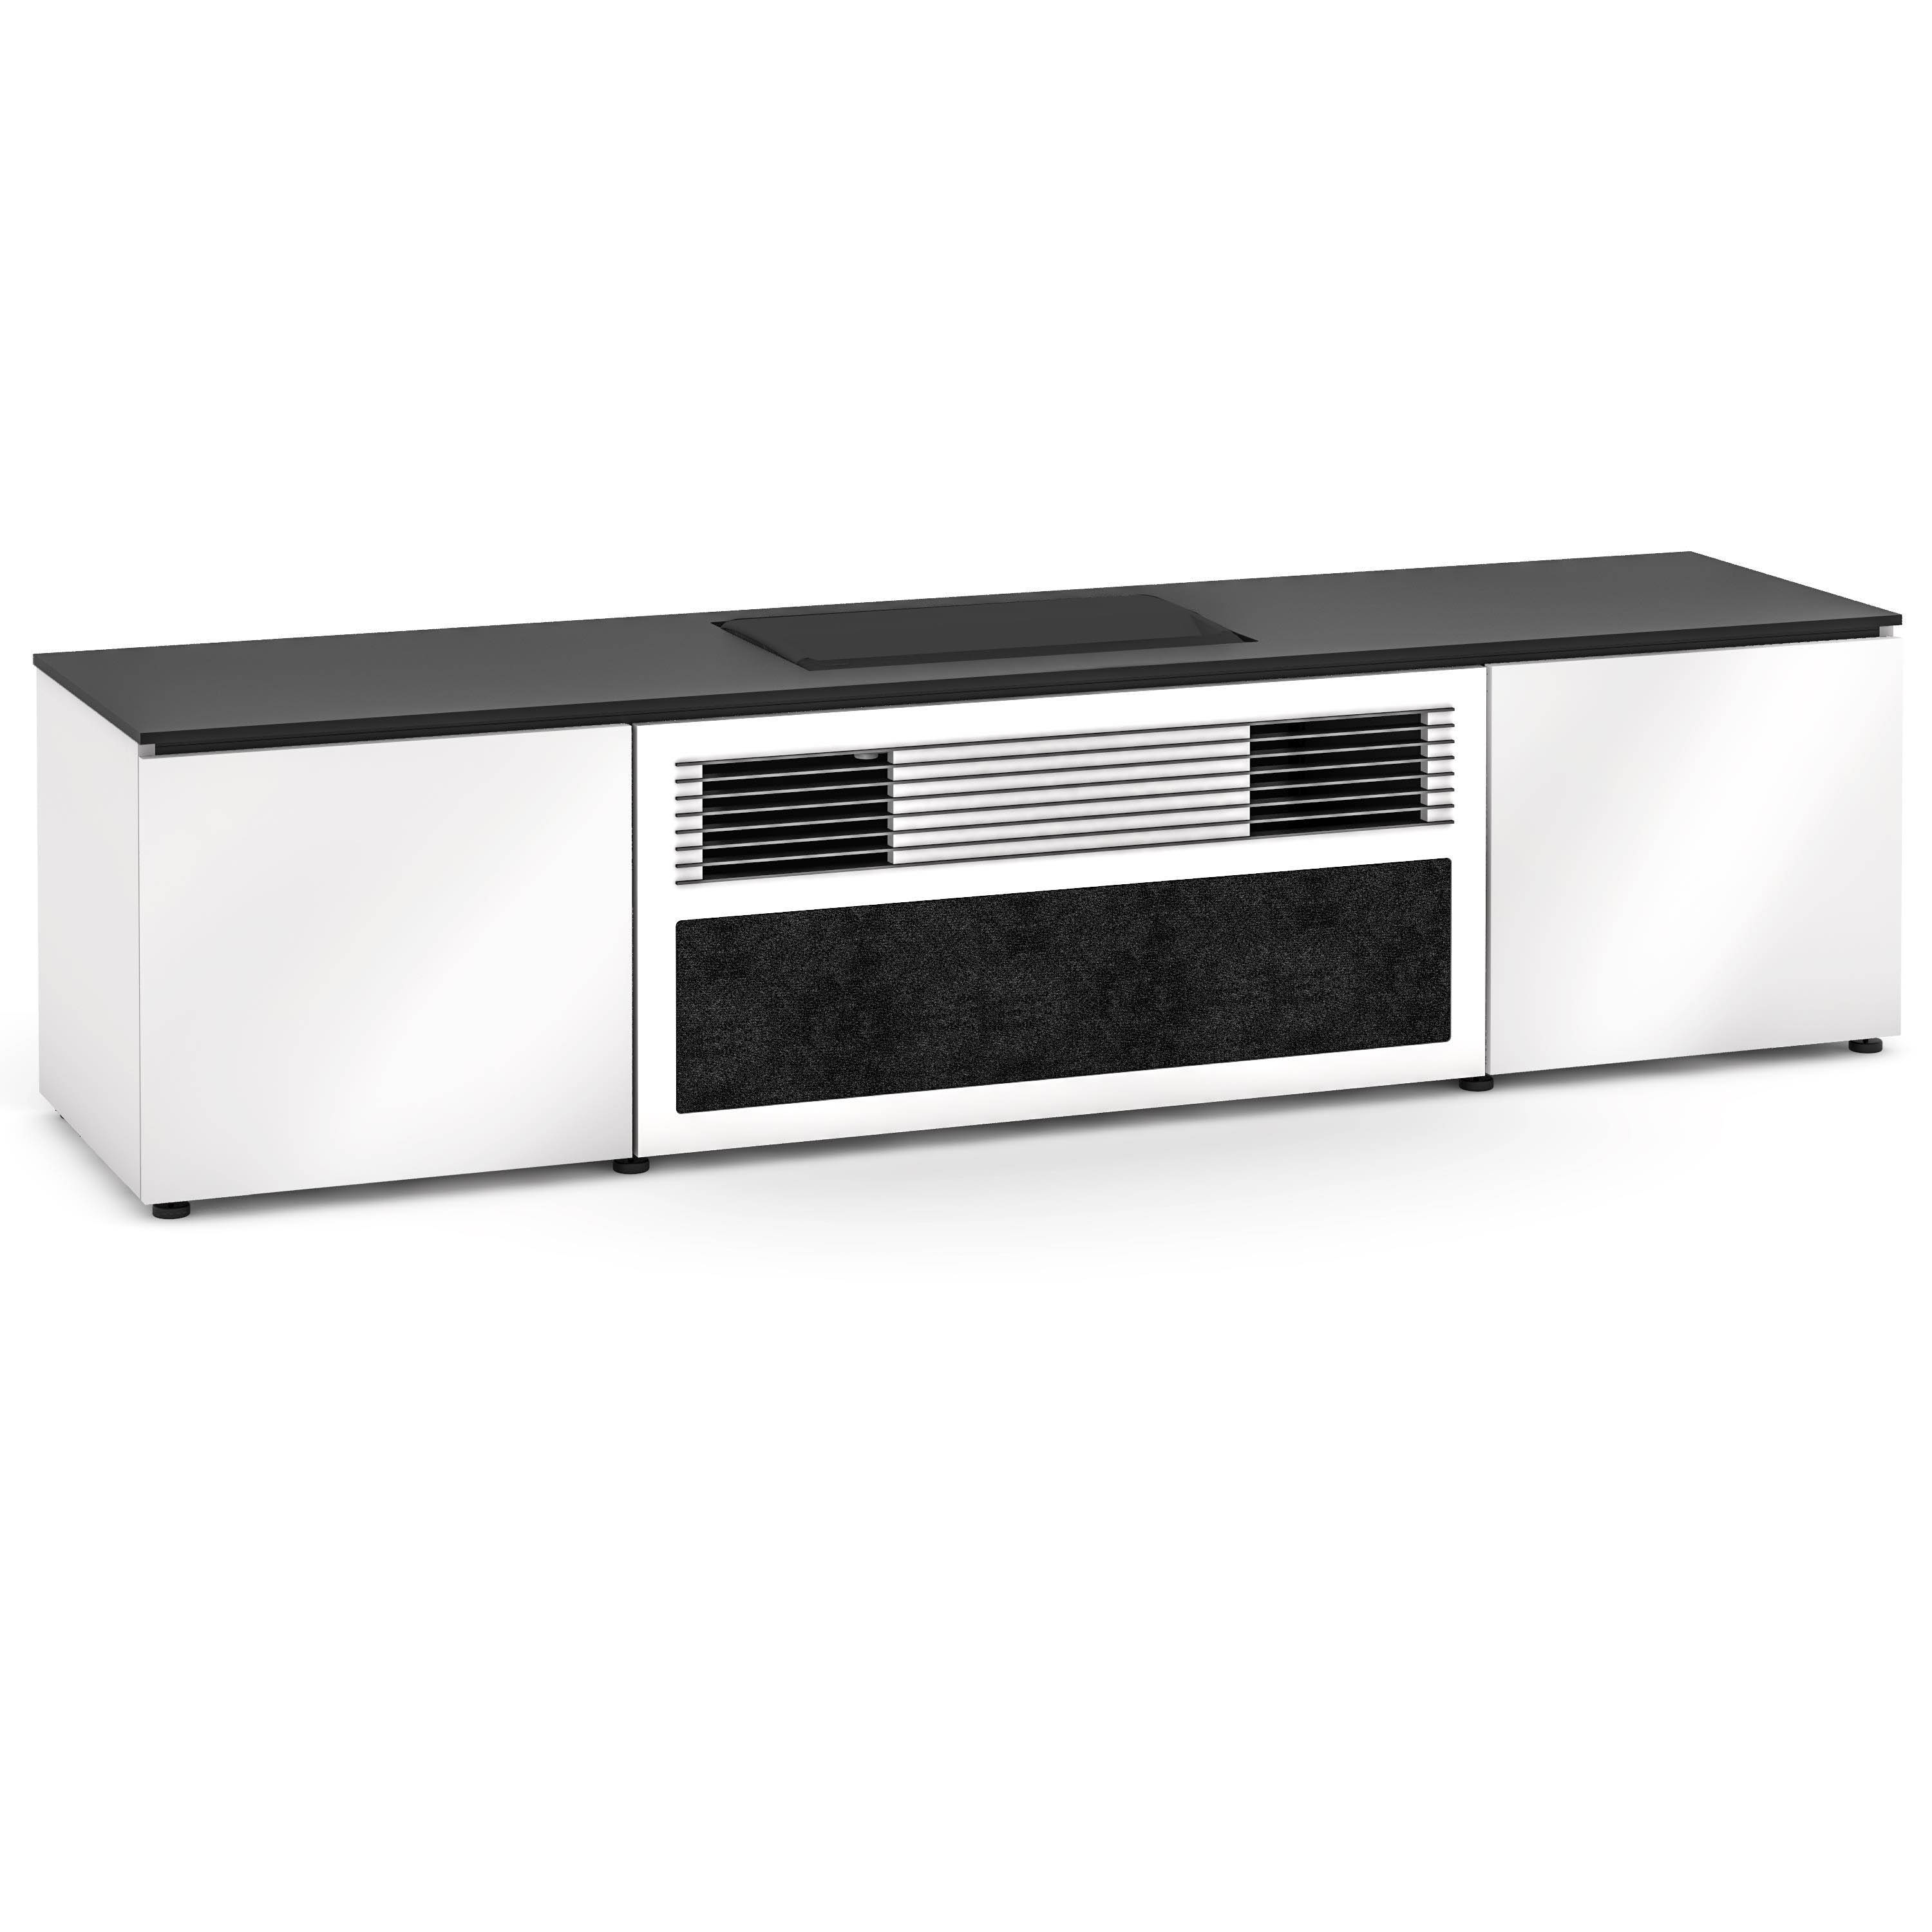 Salamander Designs Miami 245 Cabinet for integrated Hisense L9G UST Projector - Gloss White - X/HSEL9/245MM/BK